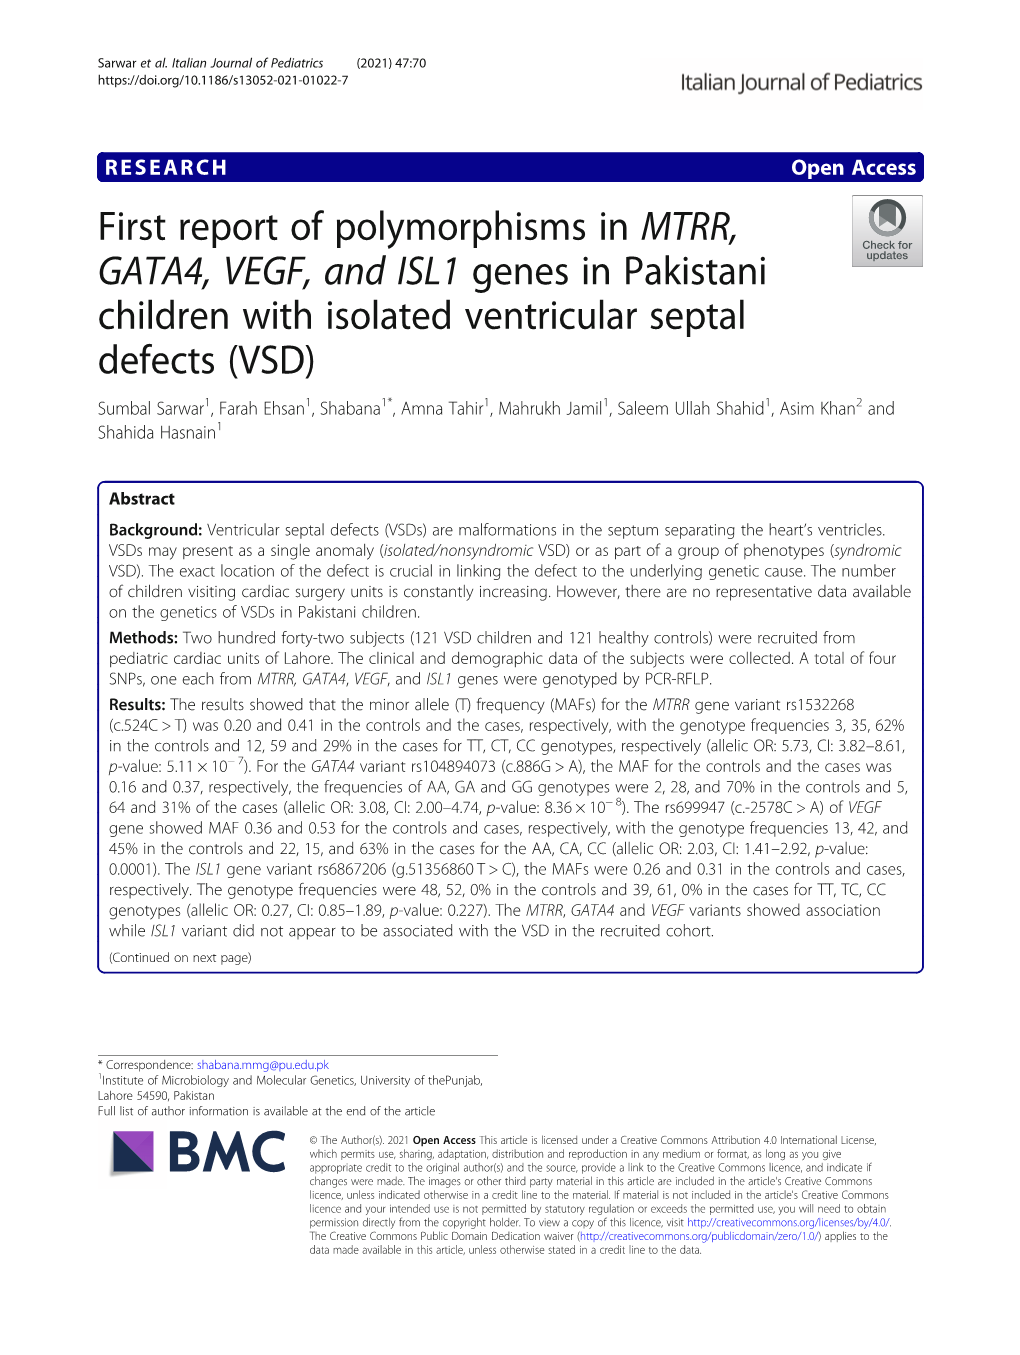 First Report of Polymorphisms in MTRR, GATA4, VEGF, and ISL1 Genes in Pakistani Children with Isolated Ventricular Septal Defect